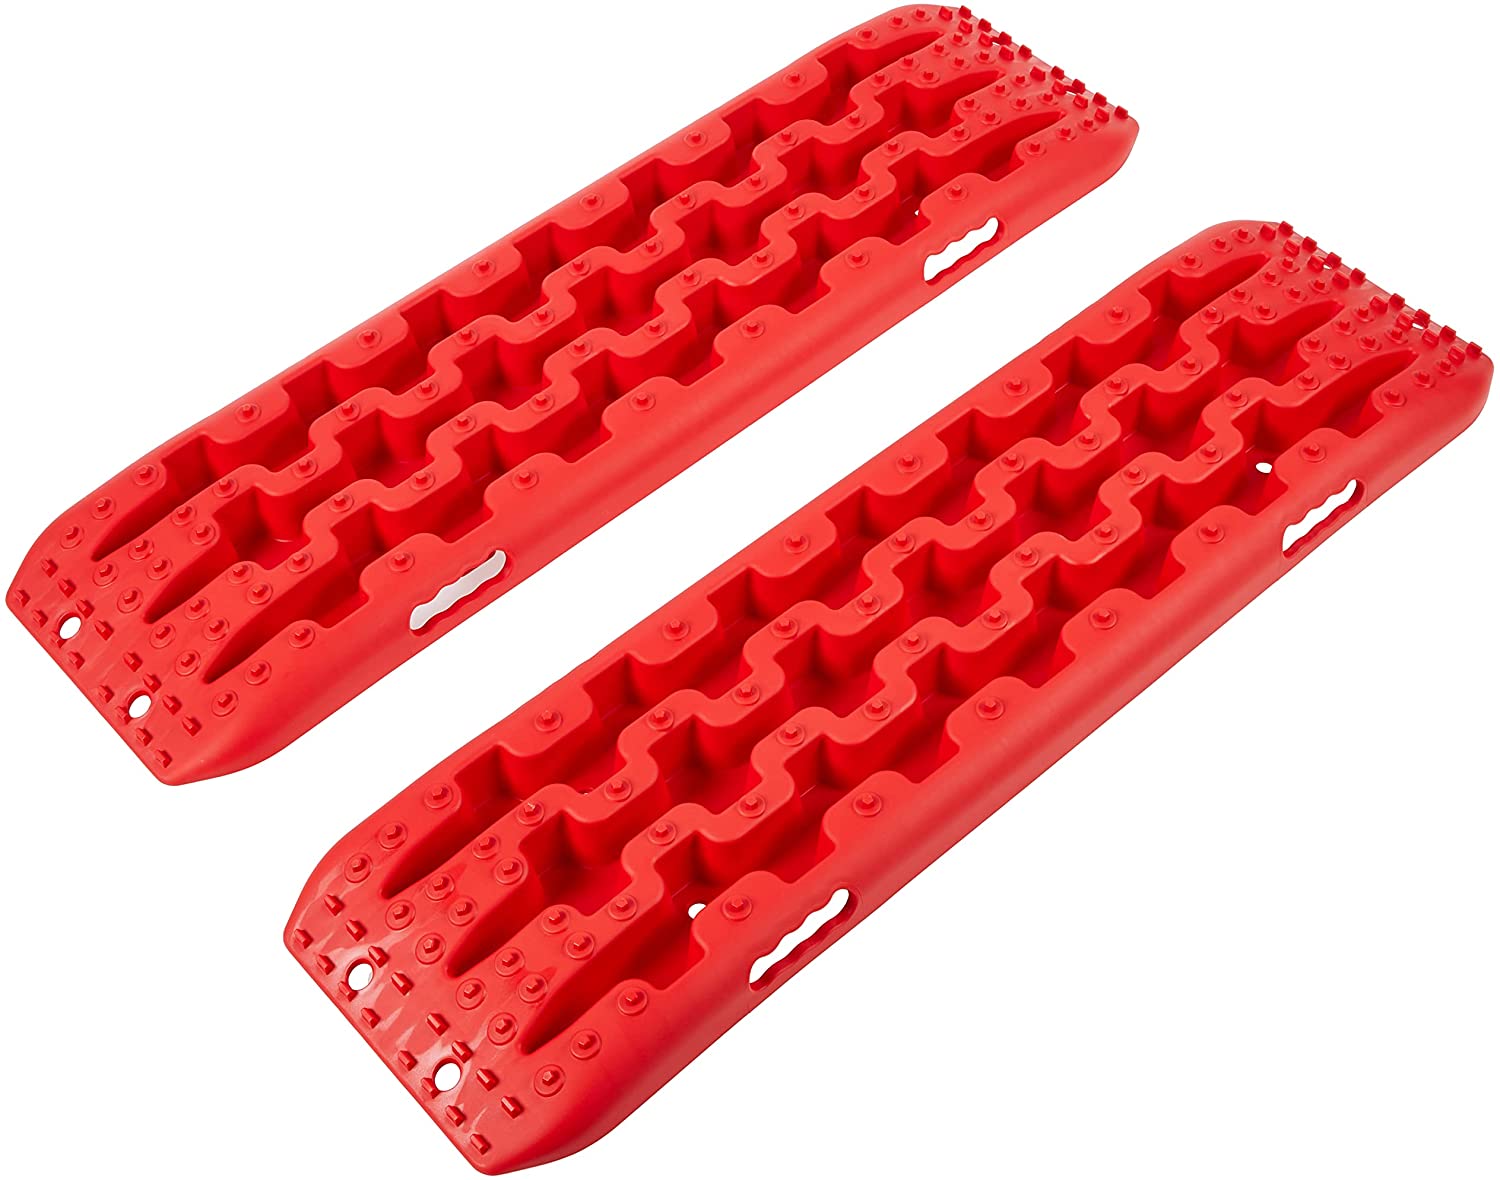 YIYITOOLS Recovery Traction Tracks 2 Piece, Tire Traction Mats for Off Road  Mud Sand Snow, 4WD Tire Ladder Lift Mat for Cars Trucks SUVs Vehicle  Extraction, Red - Factory Hub